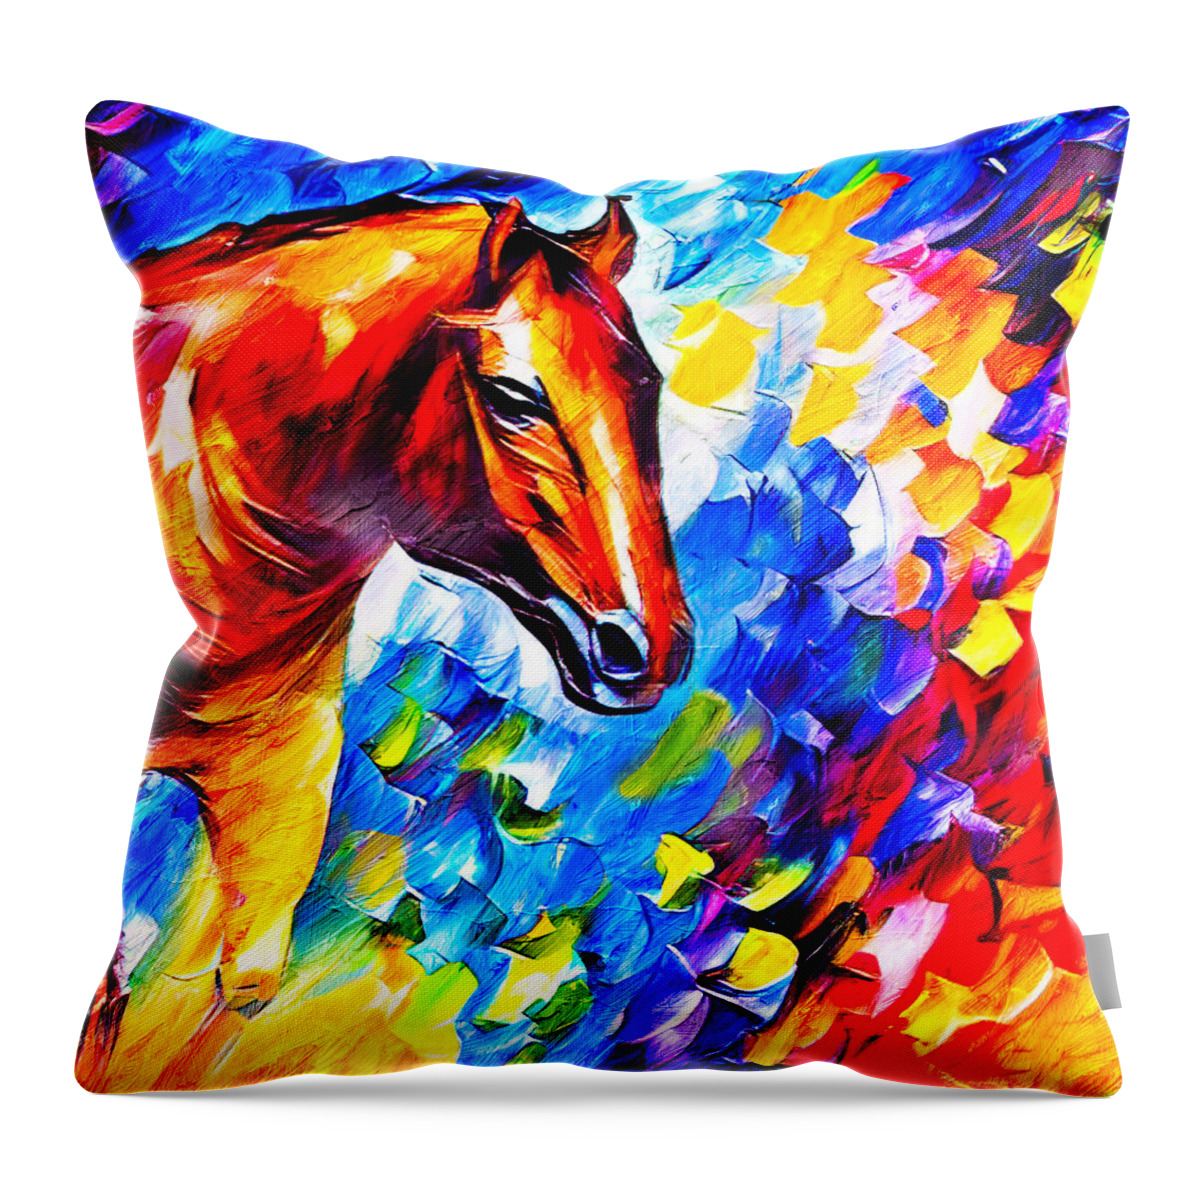 Horse Throw Pillow featuring the digital art Brown horse portrait on a colorful blue, red and yellow background by Nicko Prints